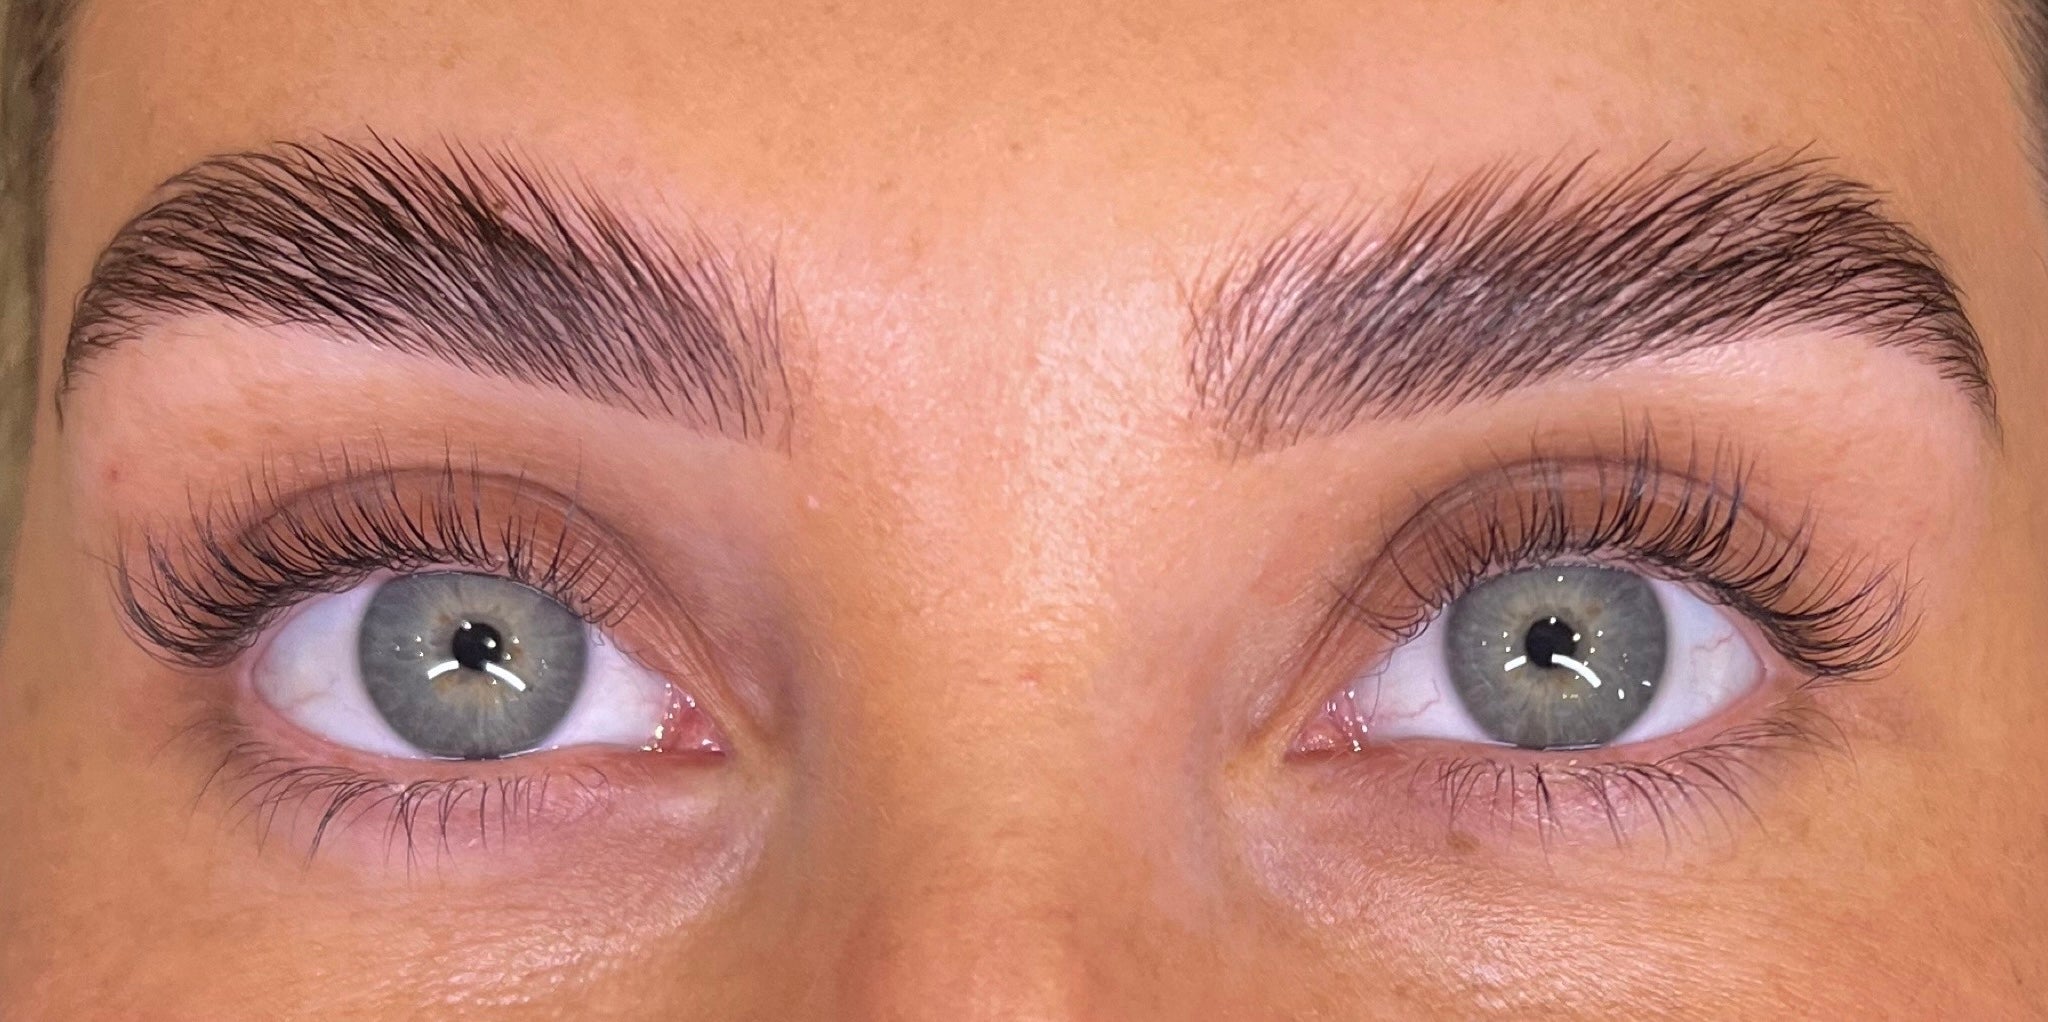 After using Purely Lashes Eye Lash Growth Serum, her eyelashes are longer, fuller, and healthier.